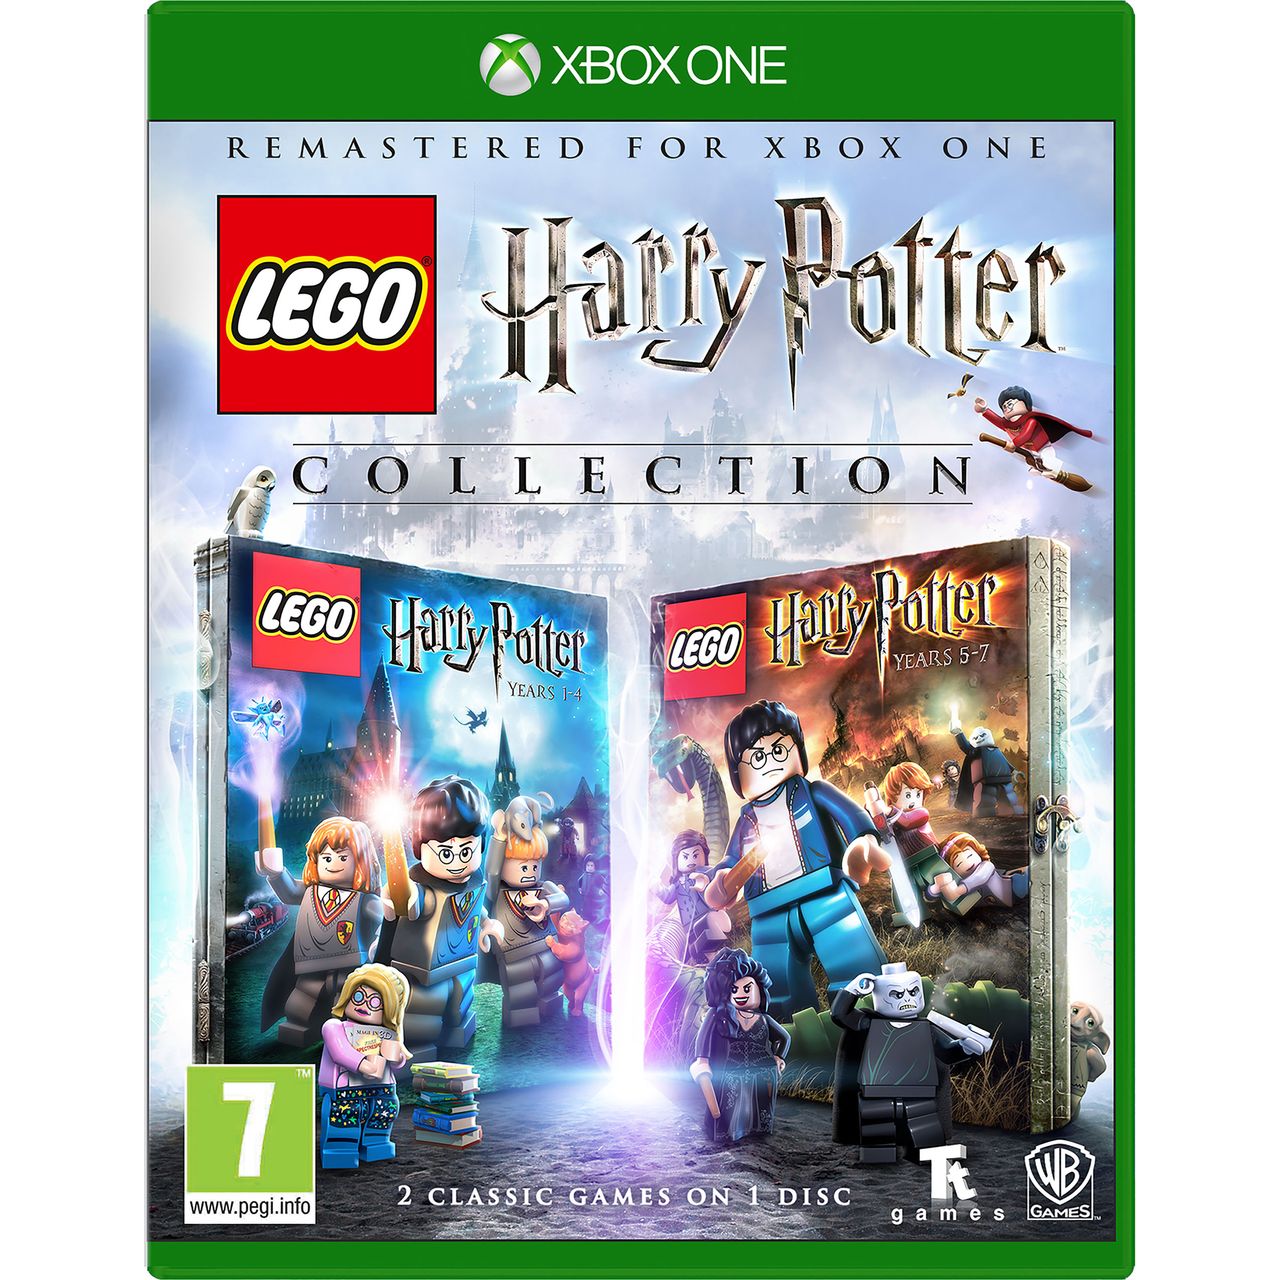 Lego Harry Potter Years 1-7 for Xbox One [Enhanced for Xbox One X] Review